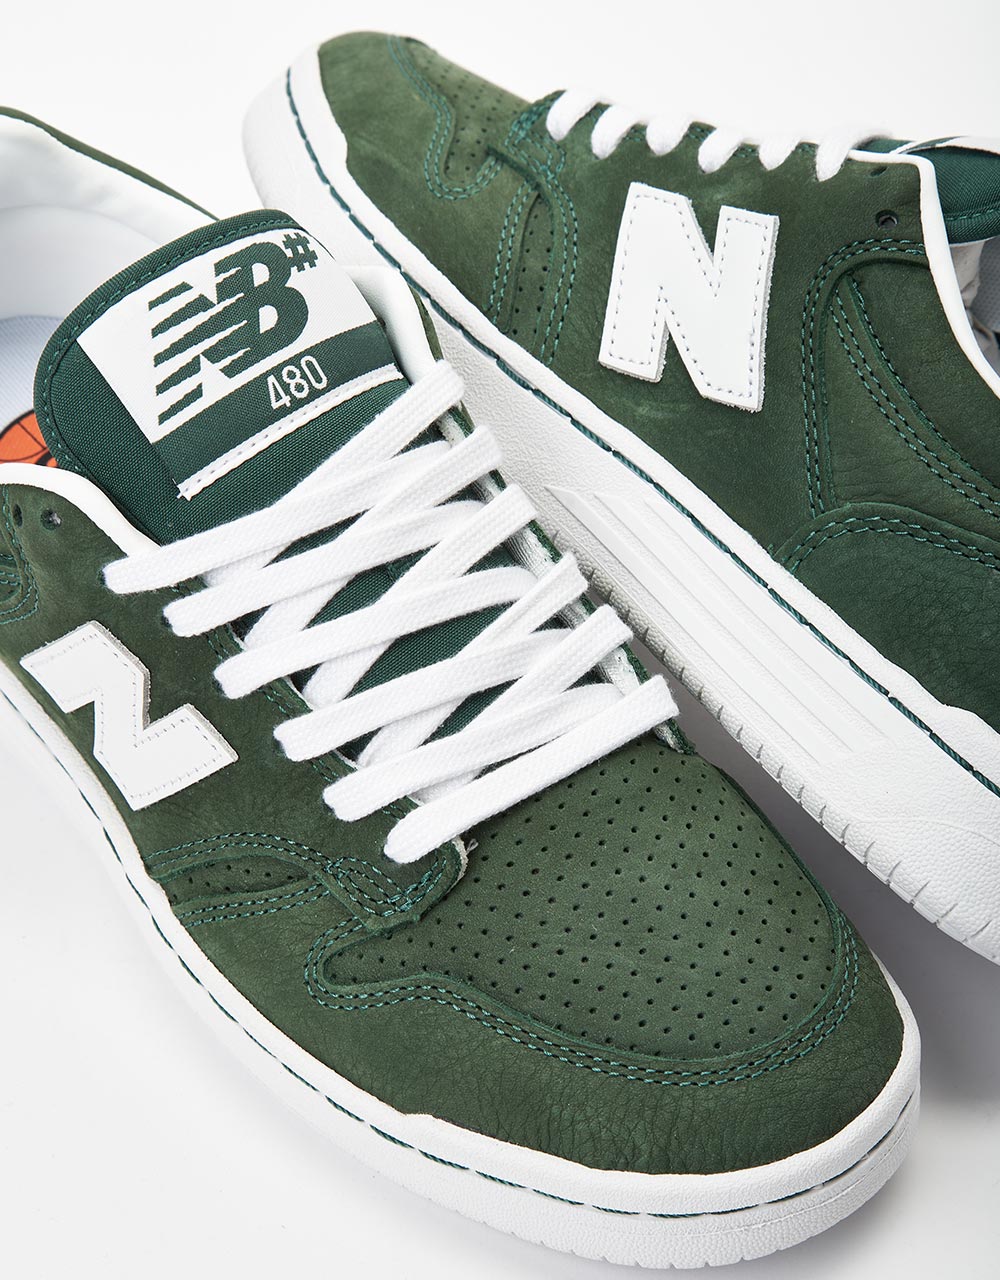 New Balance Numeric 480 Skate Shoes - Forest Green/White